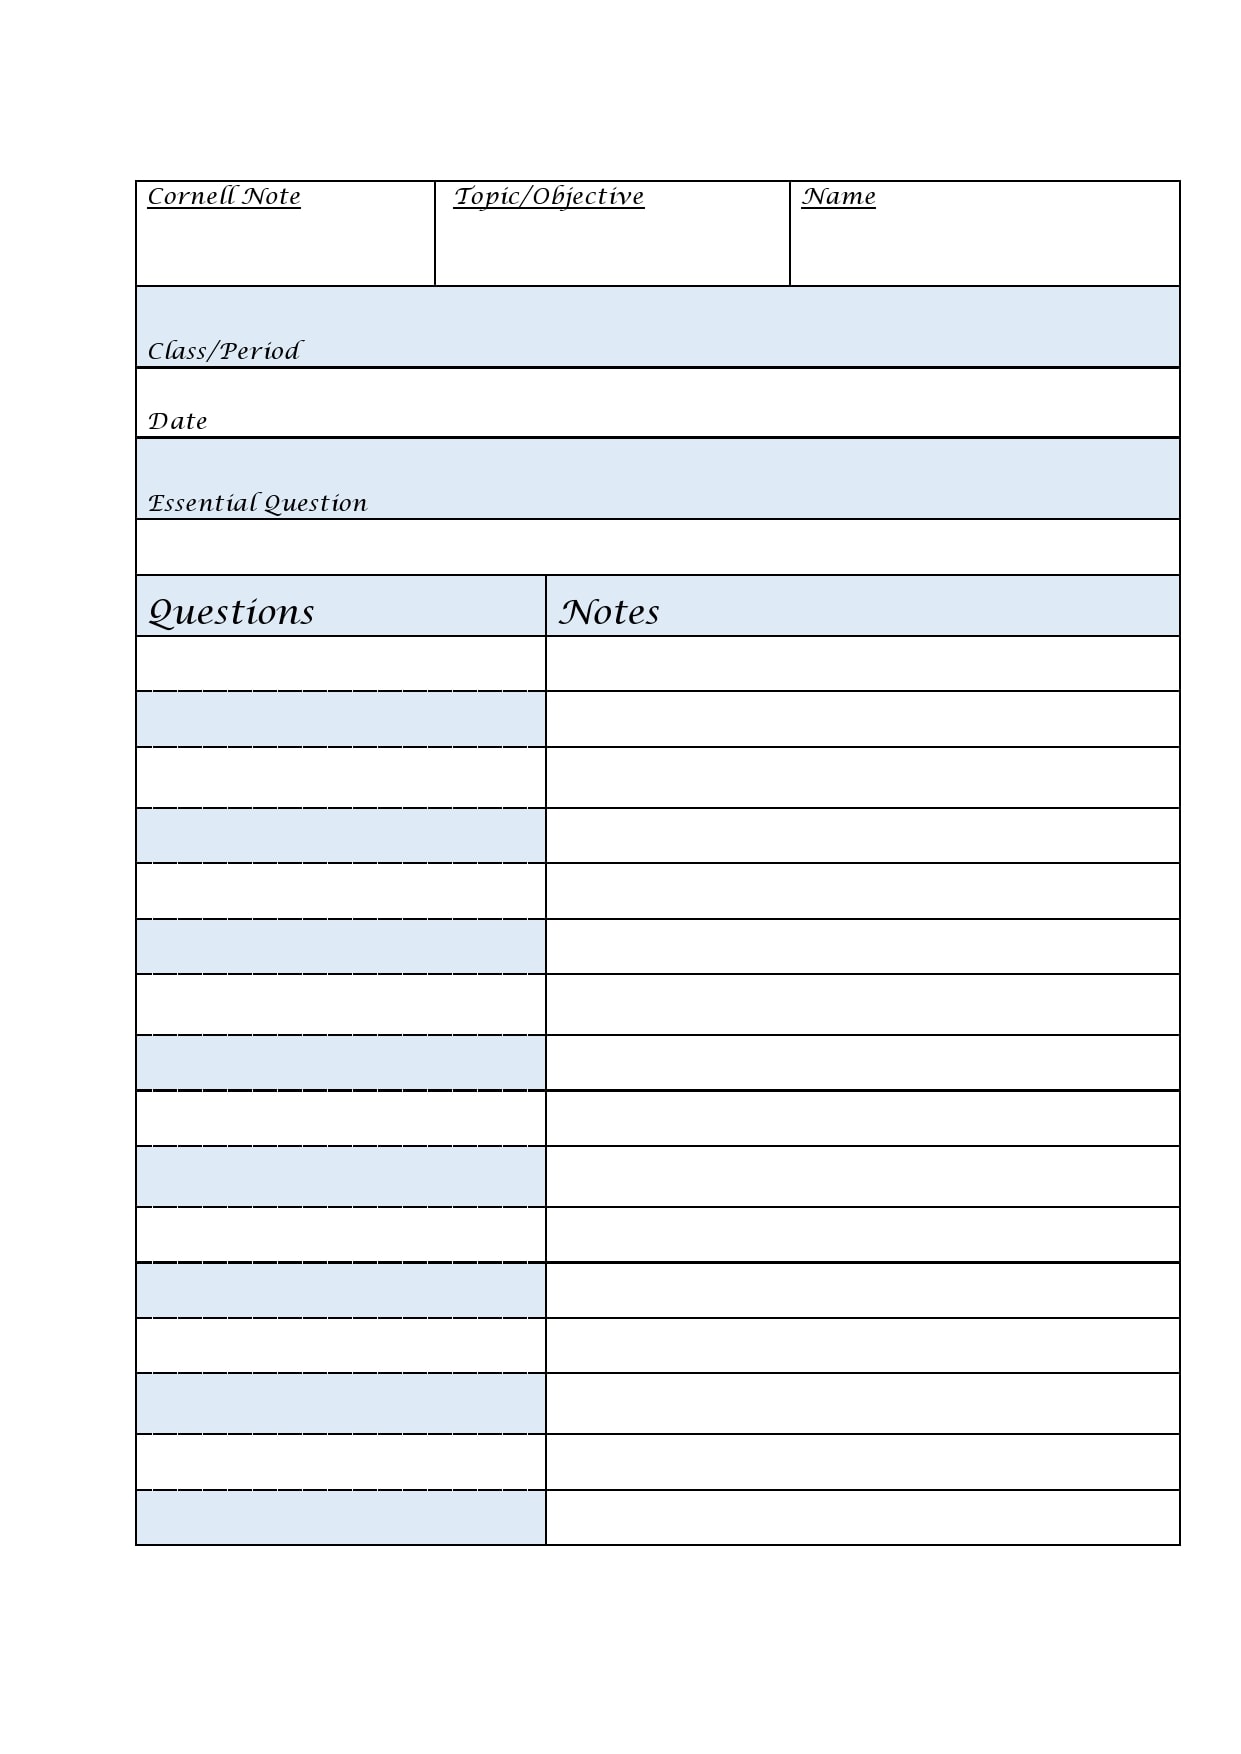 20 Printable Cornell Notes Templates [Free] - TemplateArchive Throughout Lecture Notes Template Word